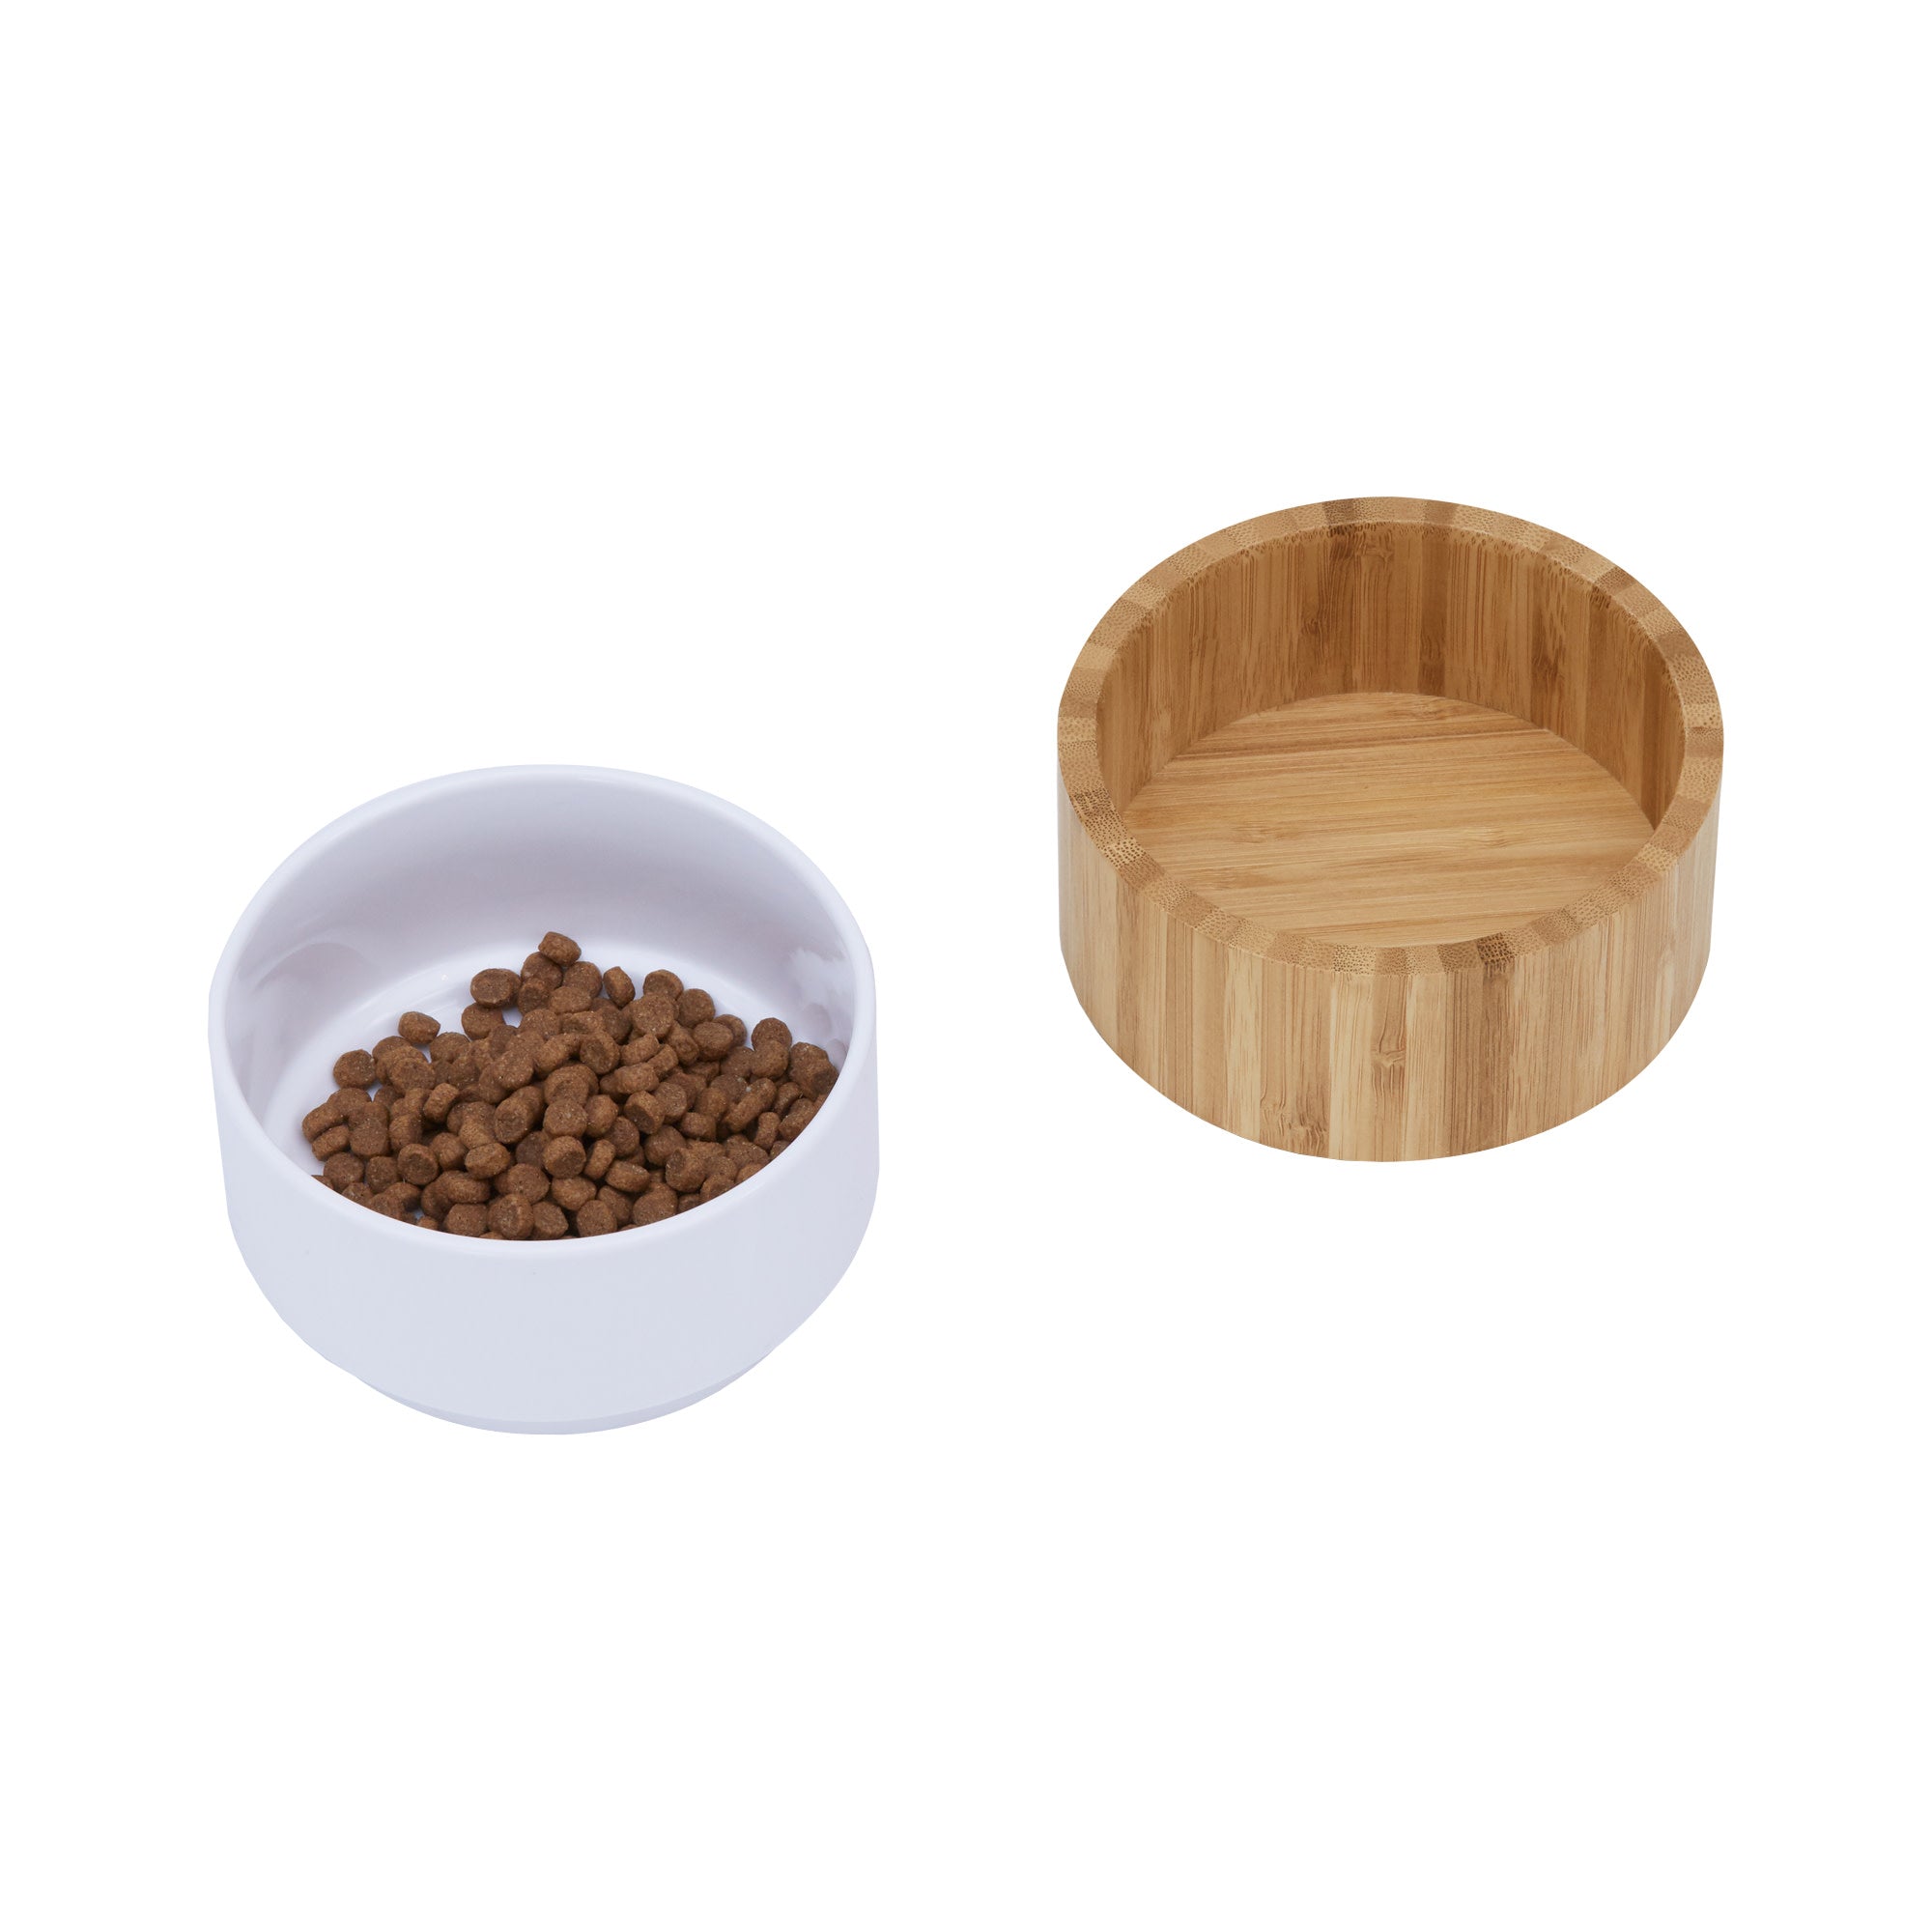 Teamson Pets Billie Raised Dishwasher Safe Ceramic Pet Bowl with Bamboo Stand